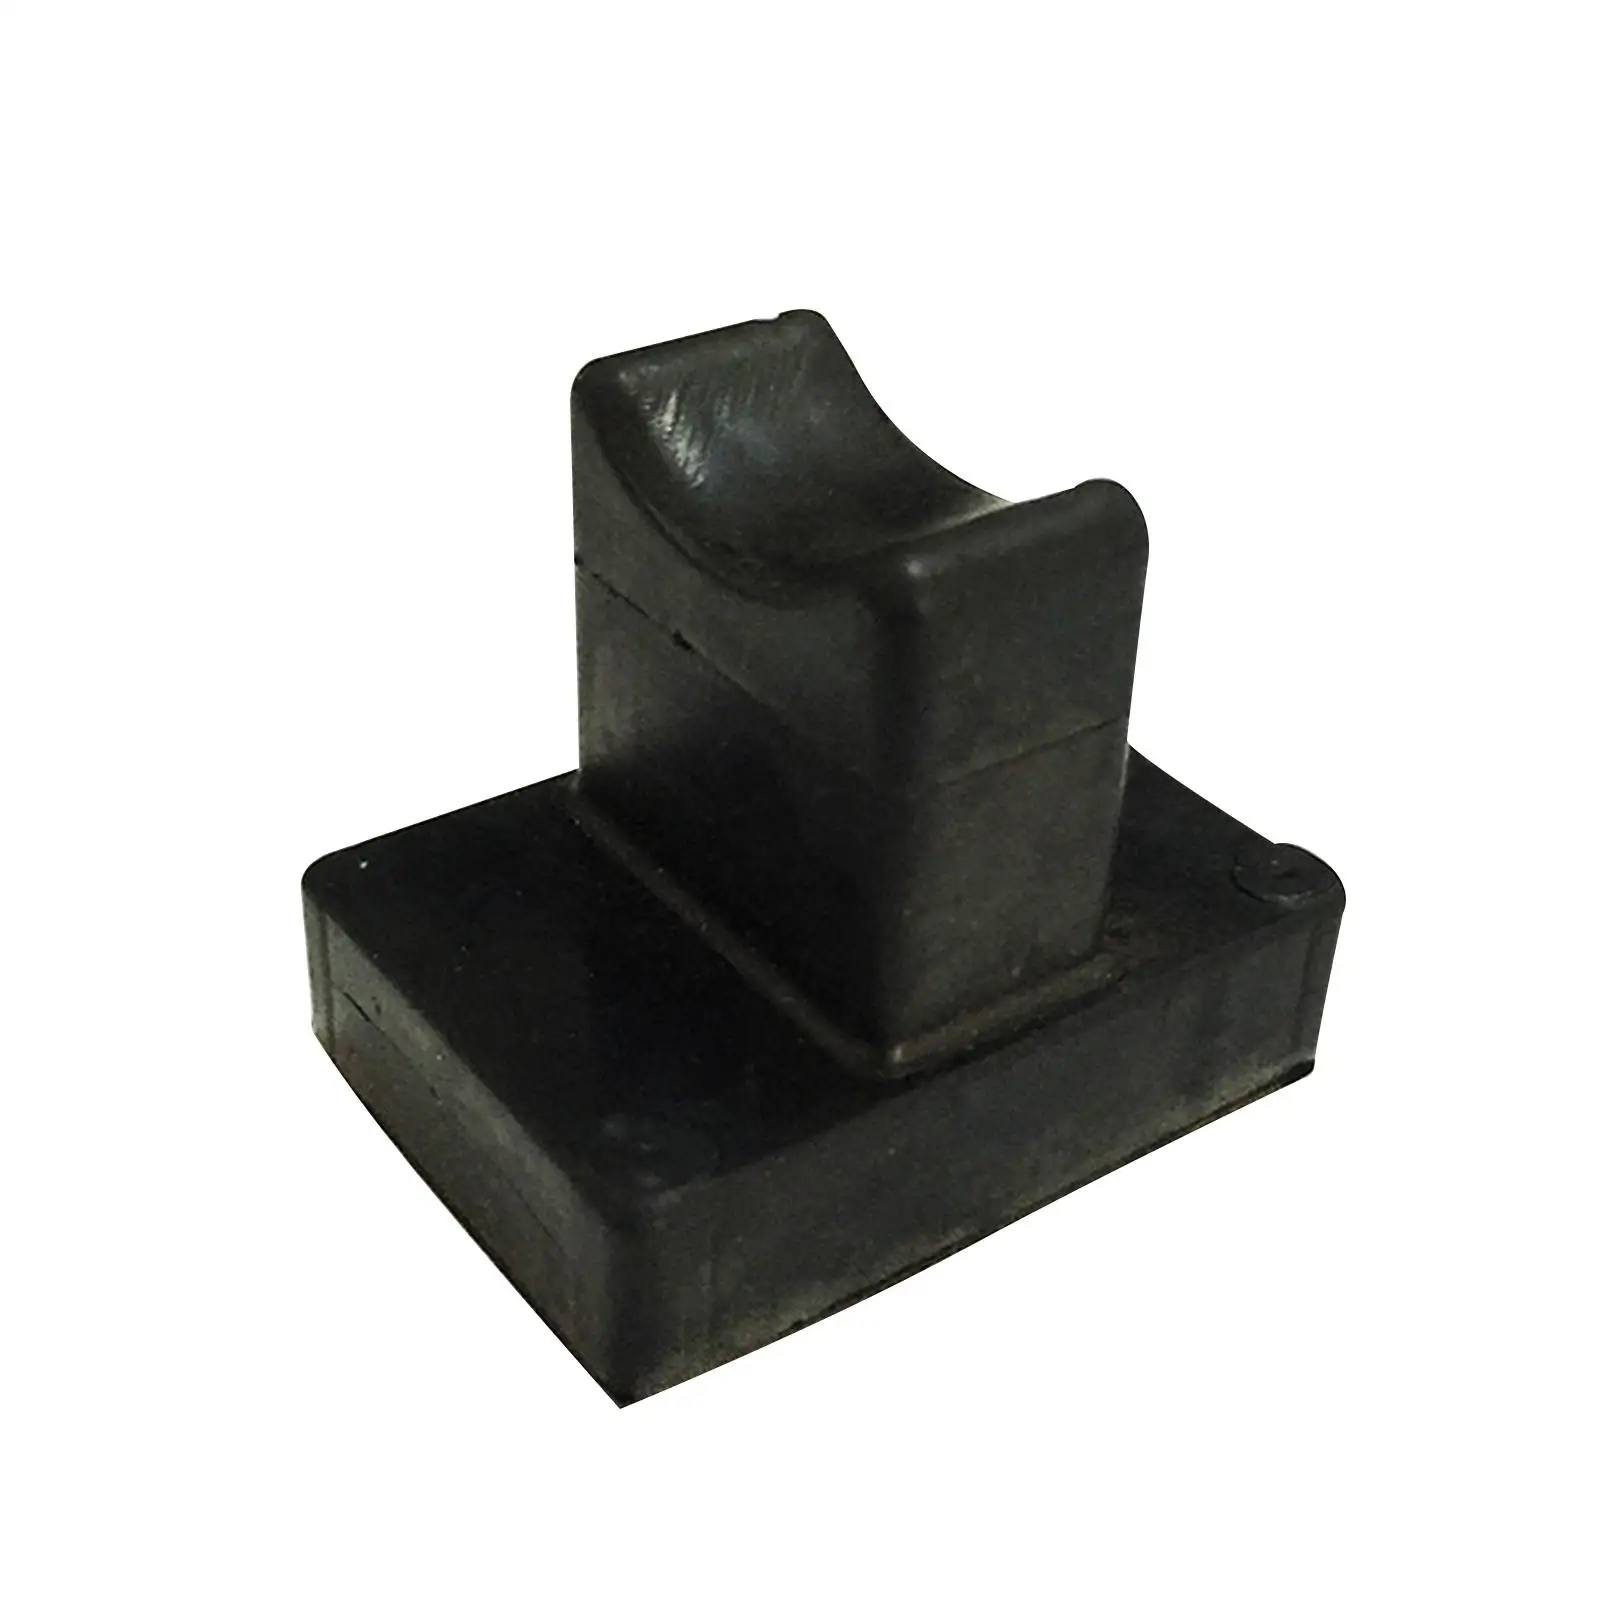 Outboard Motor Rubber Pad Accessories Professional Direct Replaces Rubber Mat 3B2-61336-0-00 for Nissan Outboard Engine